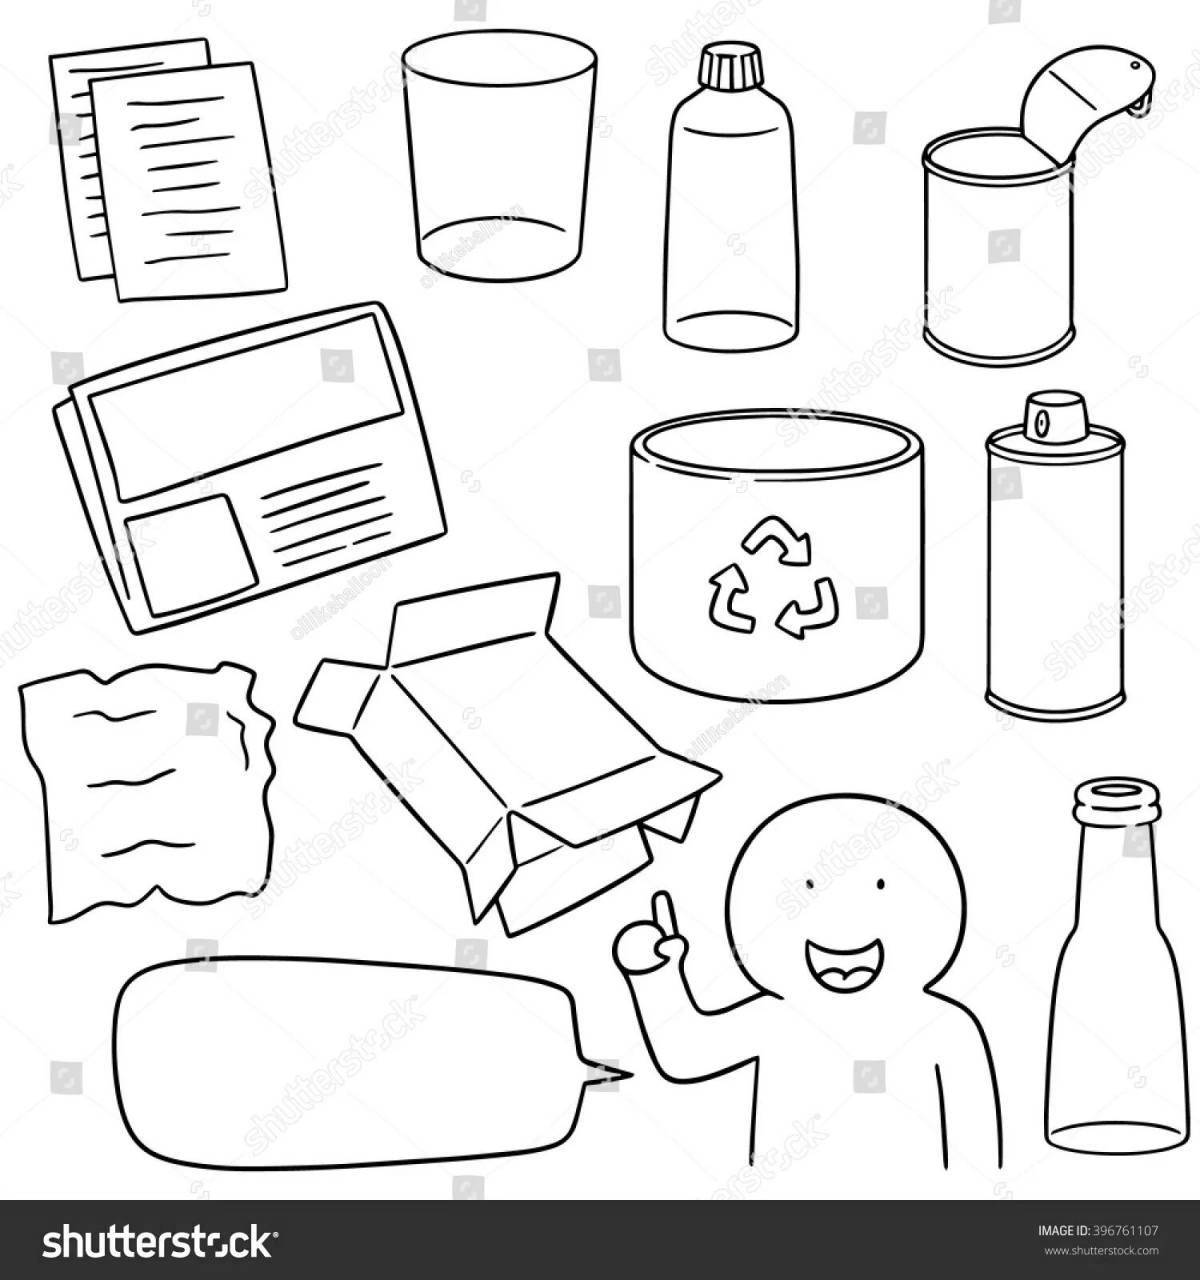 Bright garbage sorting coloring page